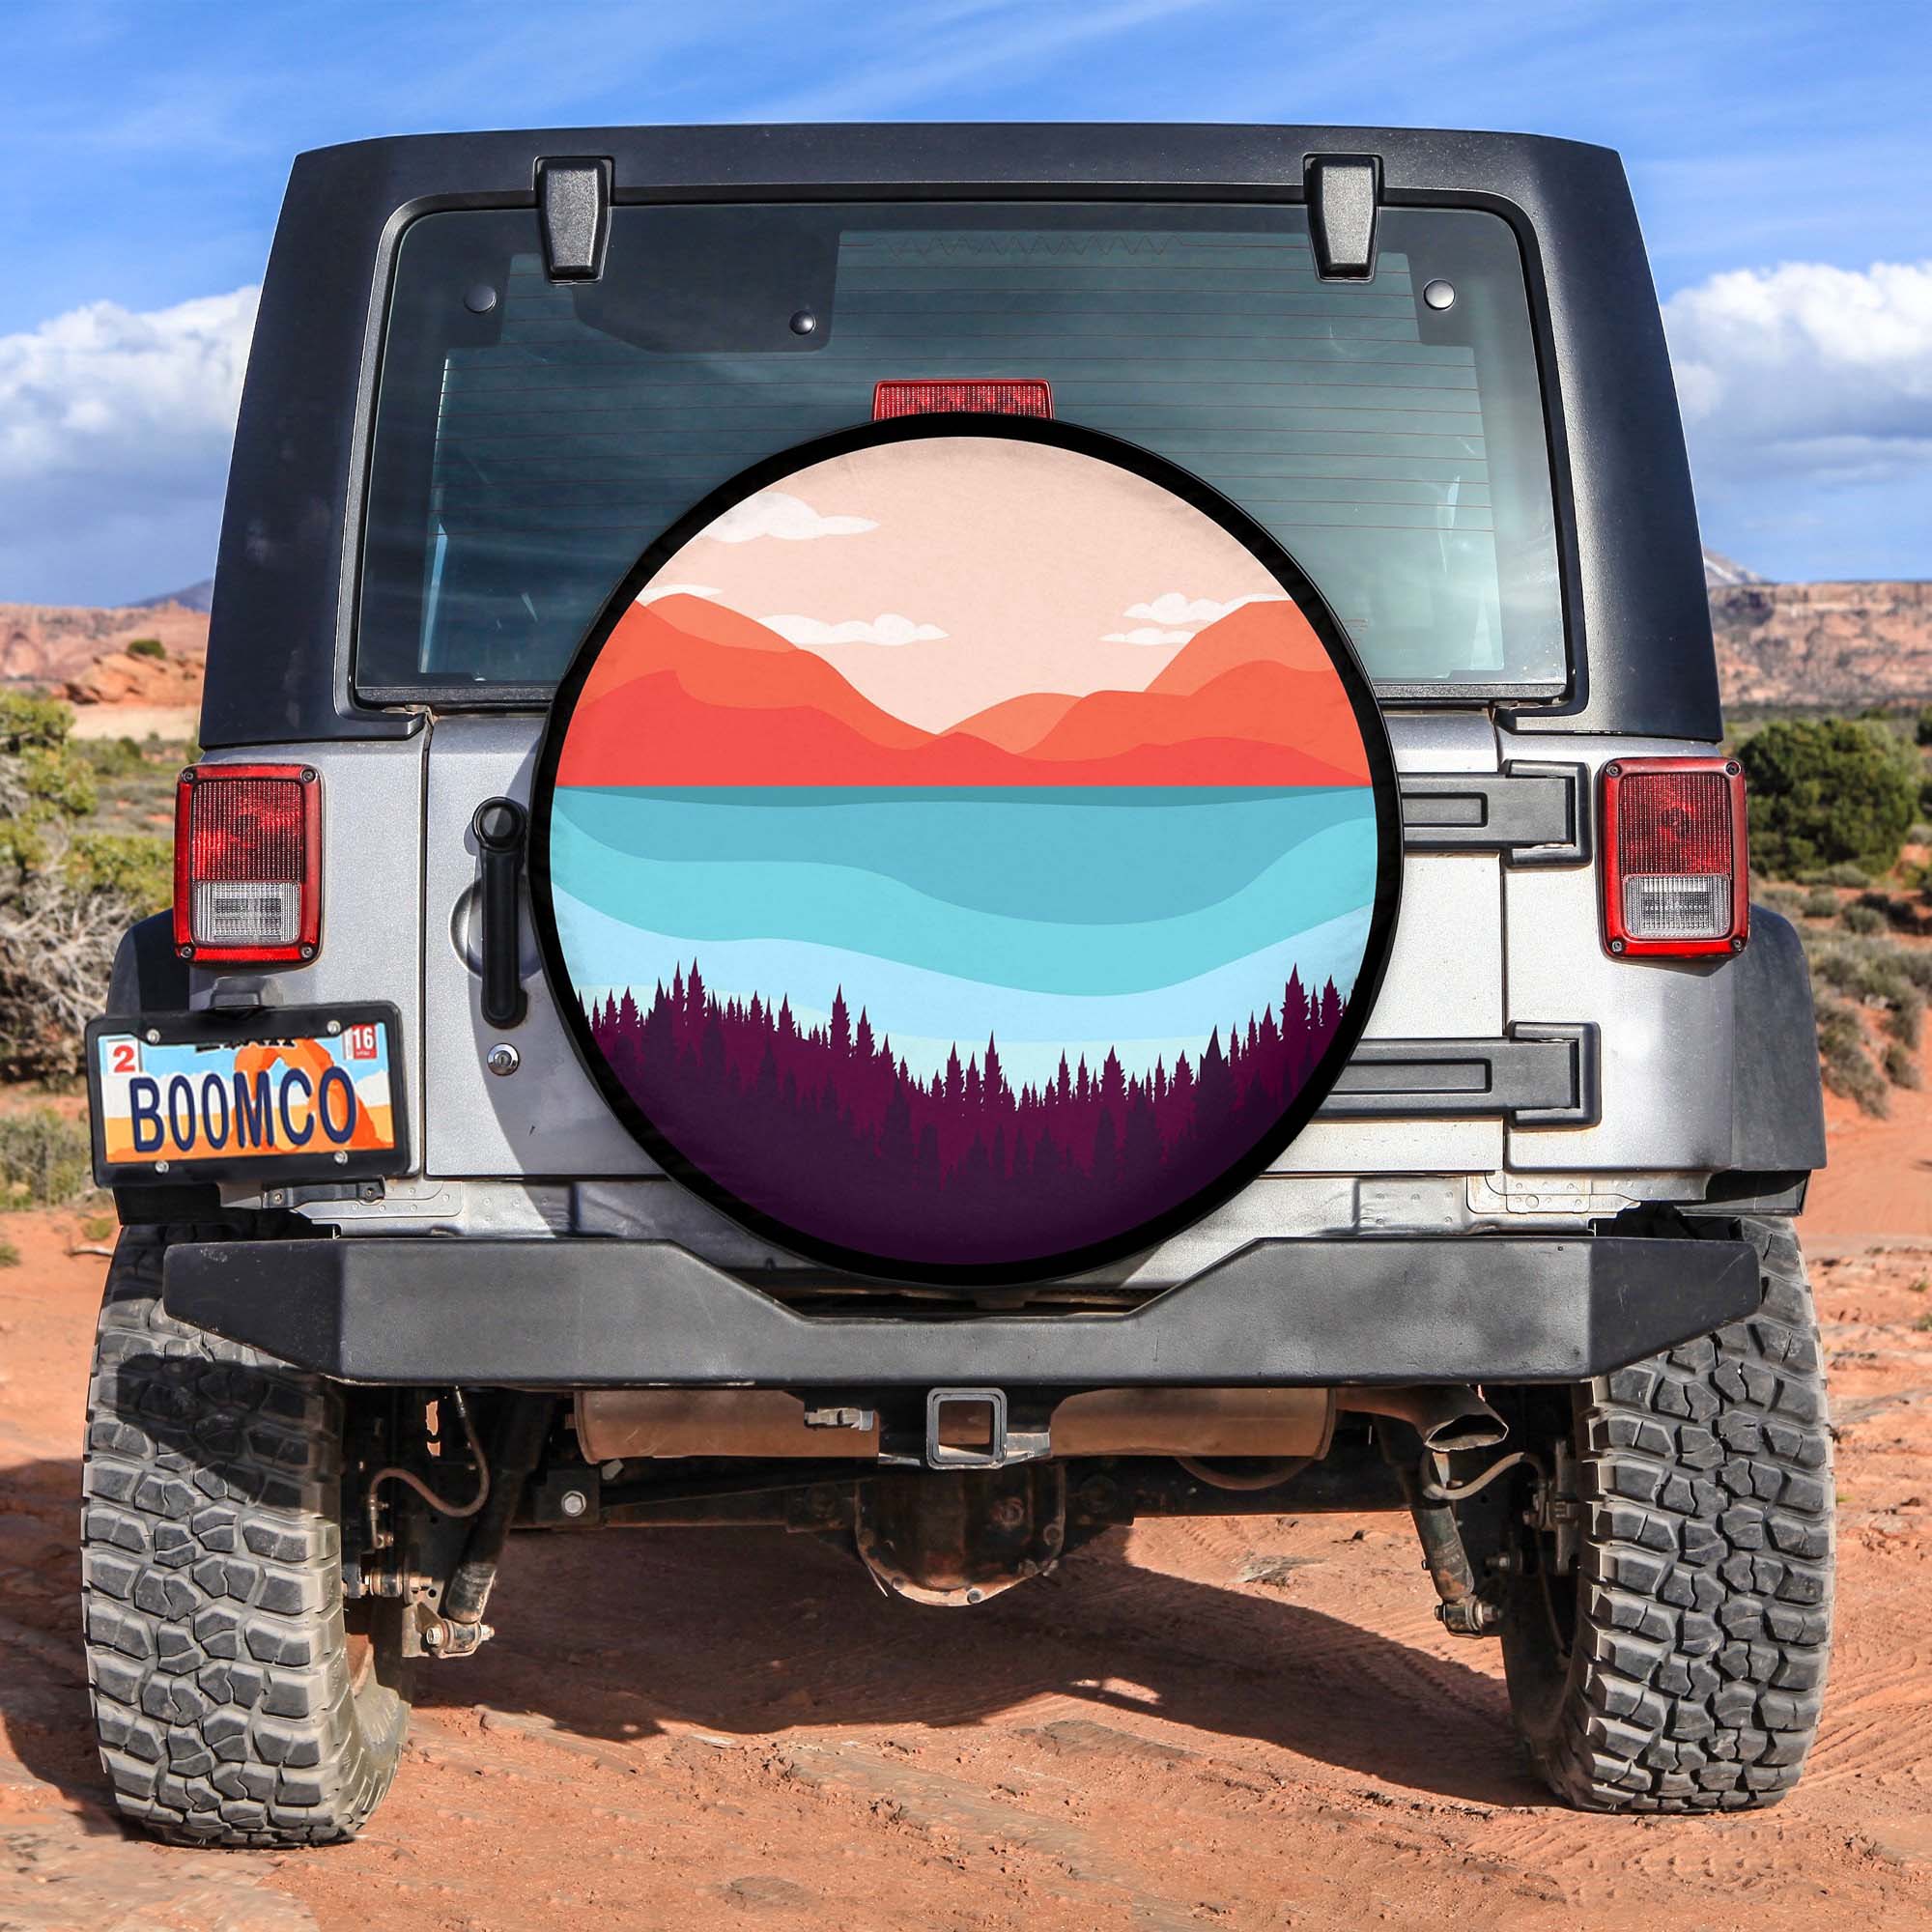 Artsy Mountain Range Spare Tire Covers Gift For Campers Nearkii